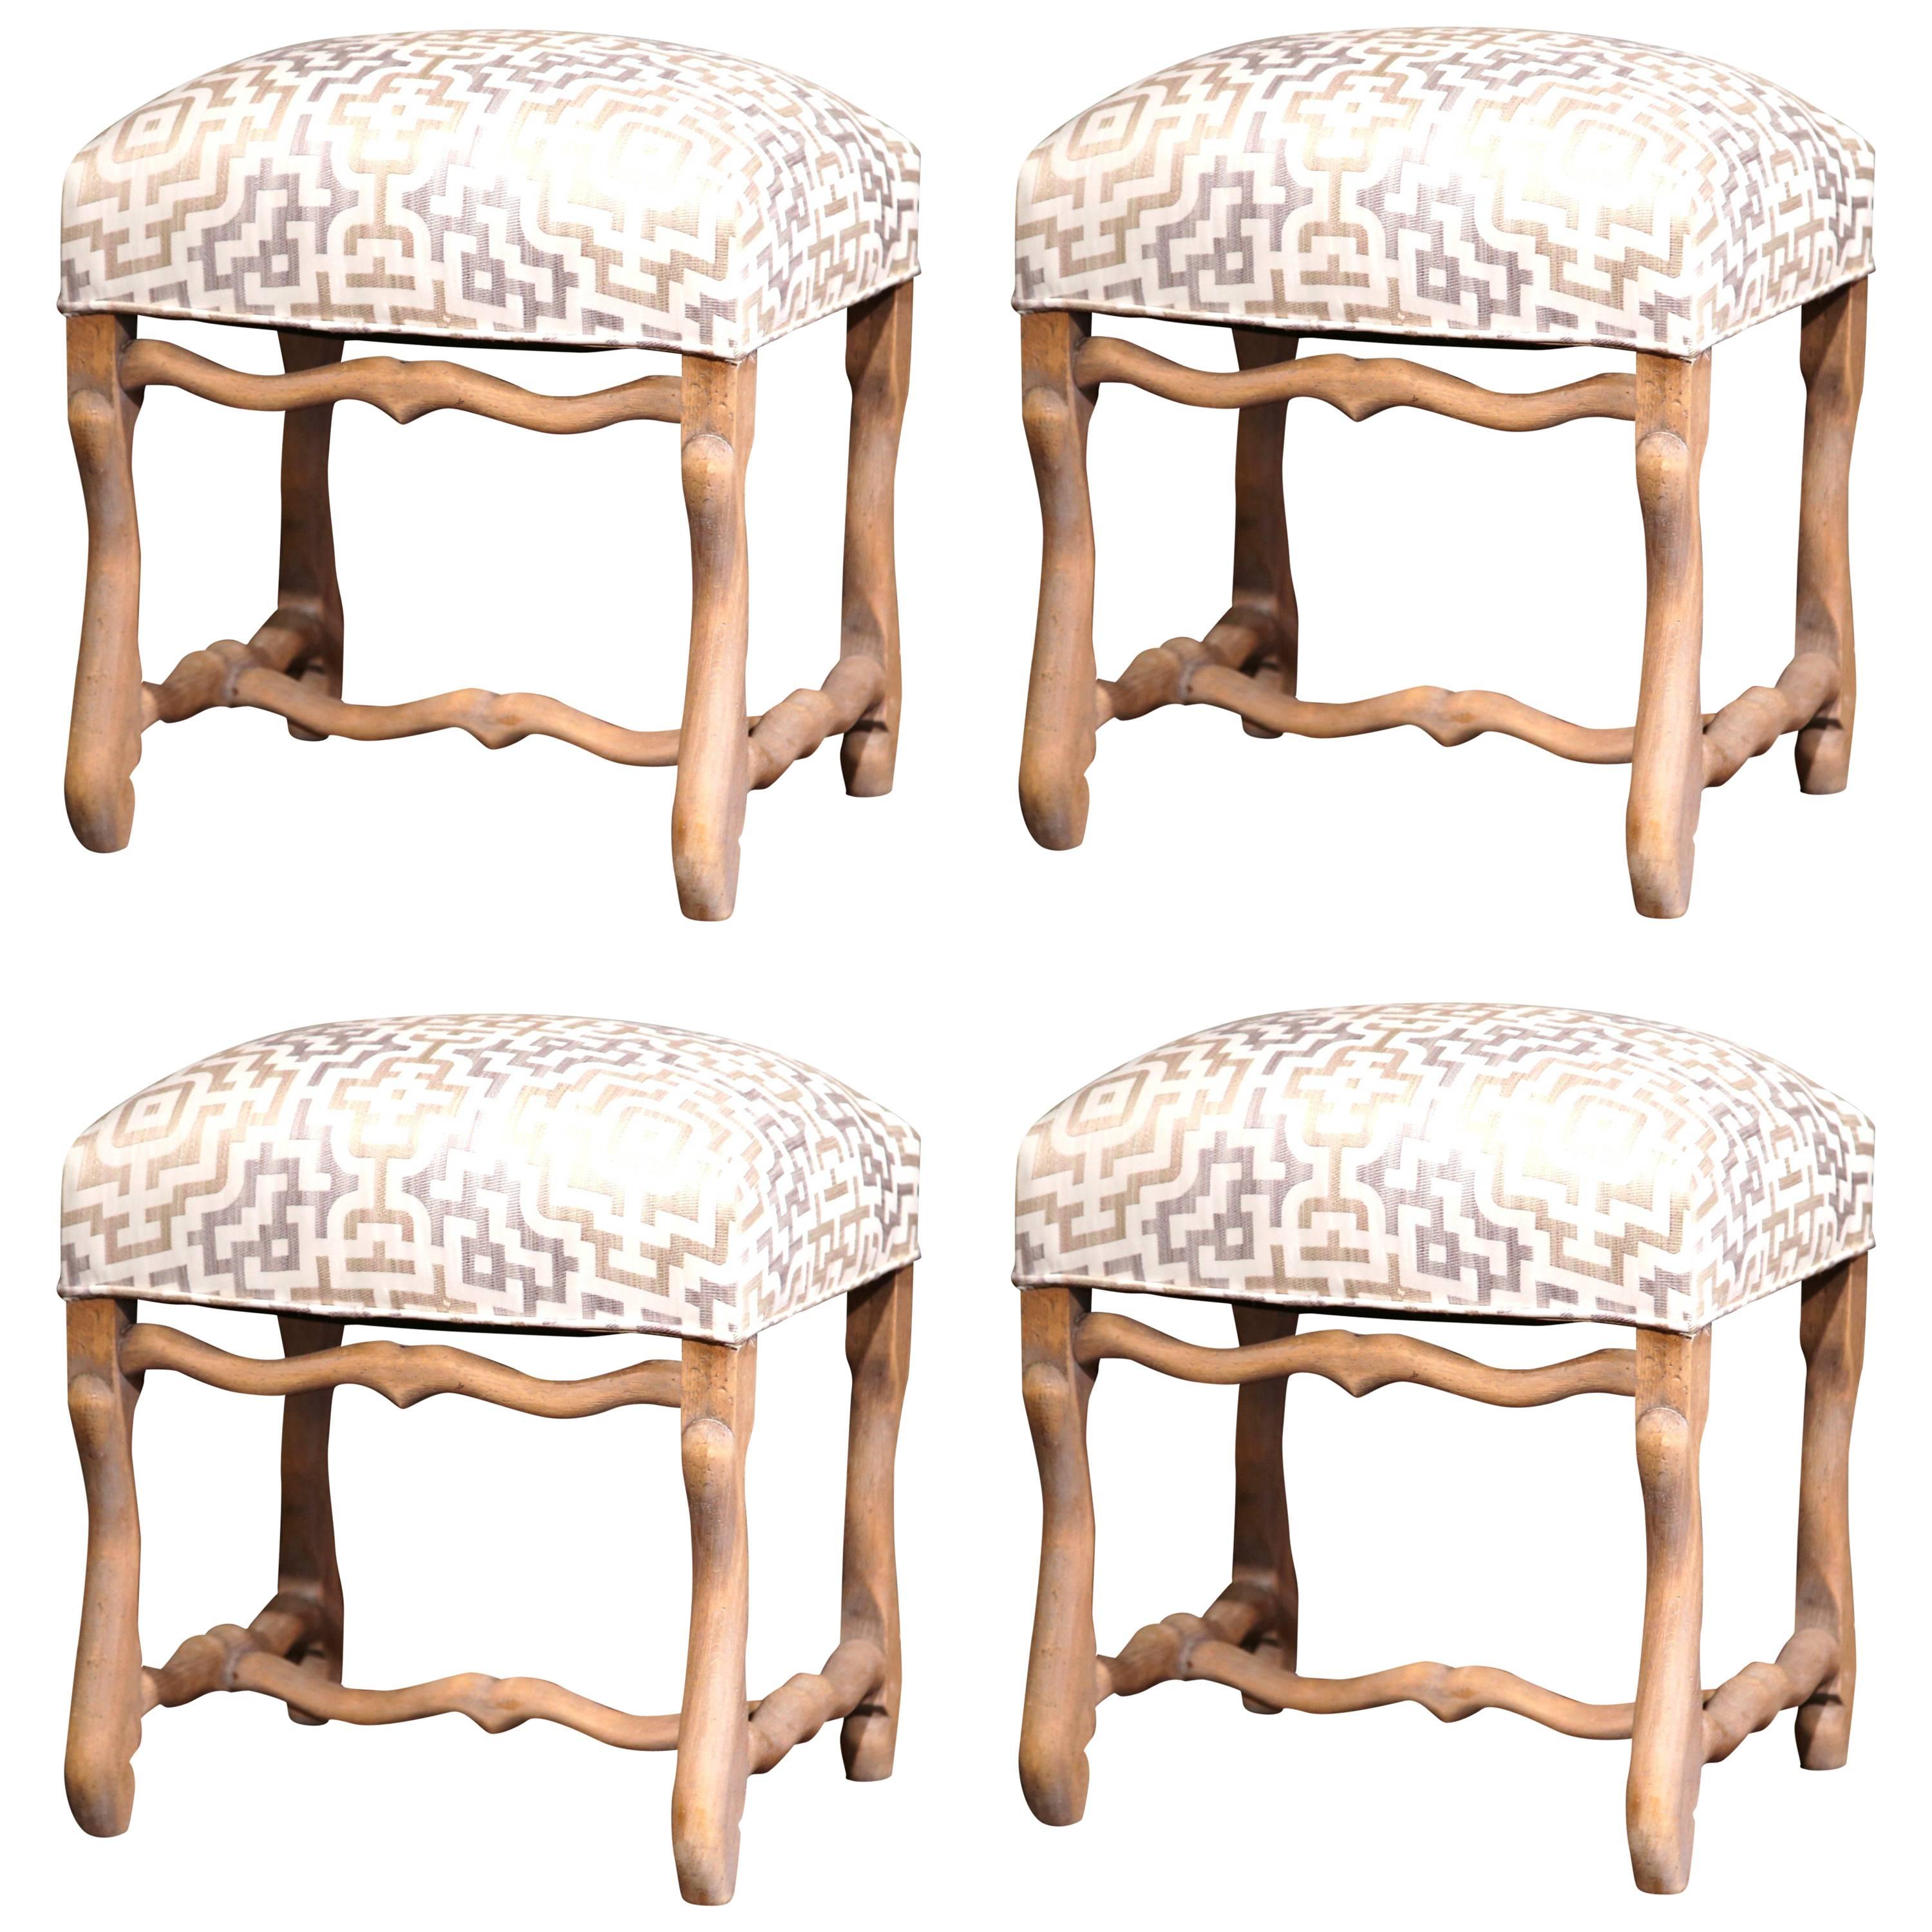 Set of Four 19th Century French Louis XIII Carved Stools with Whitewash Finish